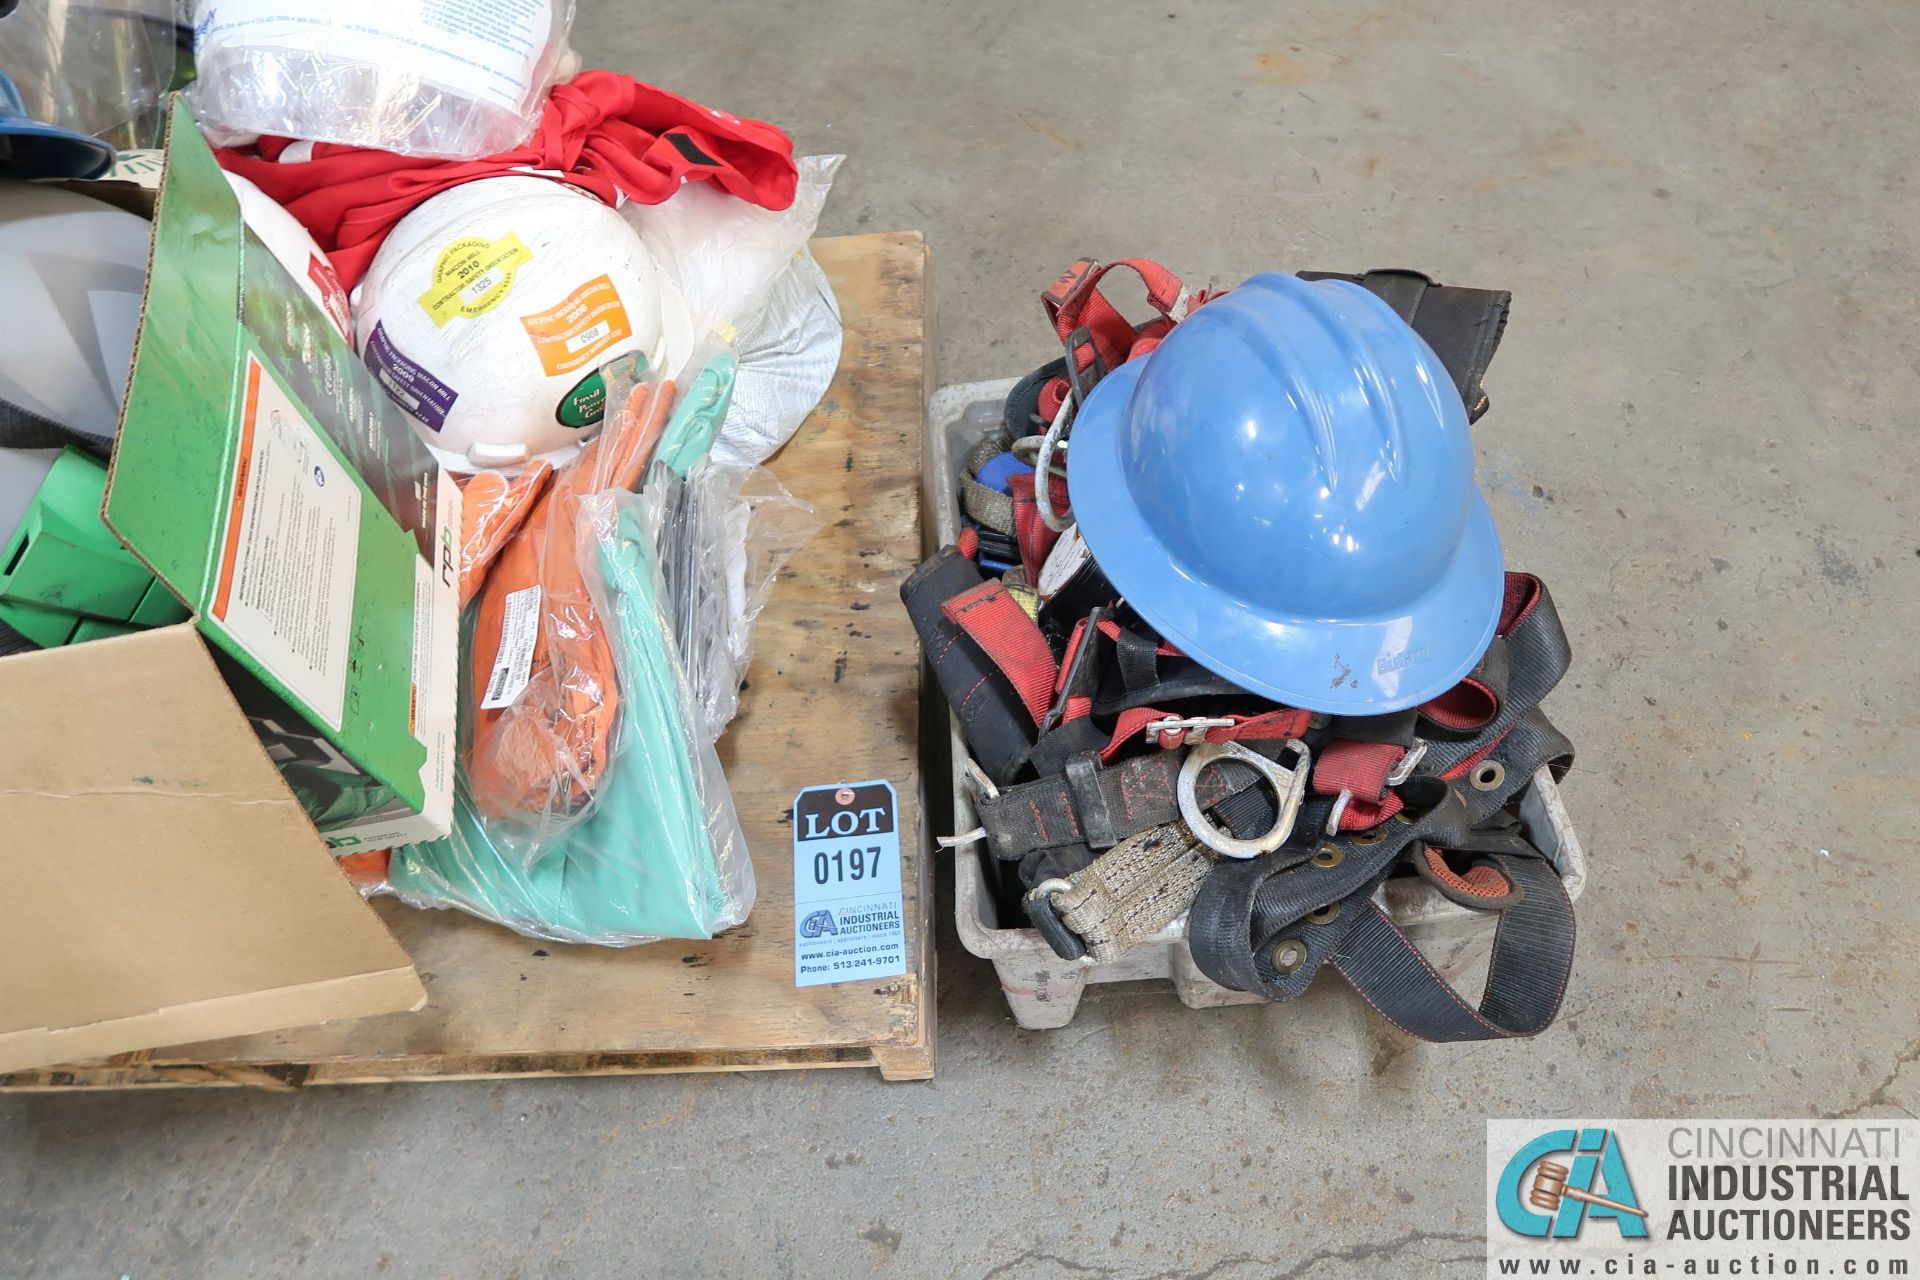 (LOT) MISCELLANEOUS SAFETY GEAR INCLUDING HELMETS, GLOVES, JACKETS, CLEAN SUITS, HARNESSES - Image 2 of 4